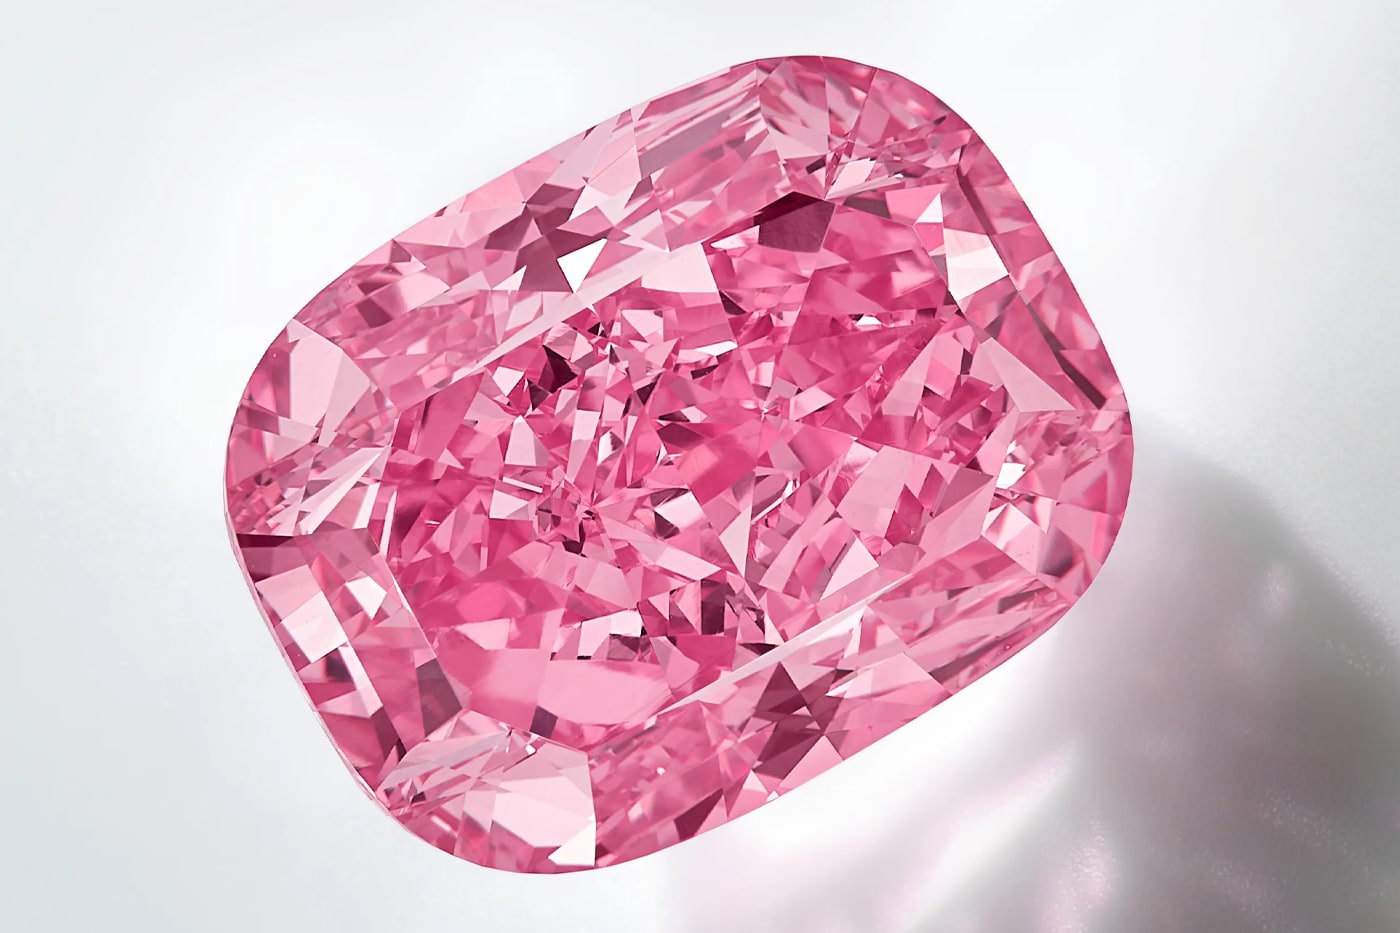 The most expensive diamond on the market goes up for auction